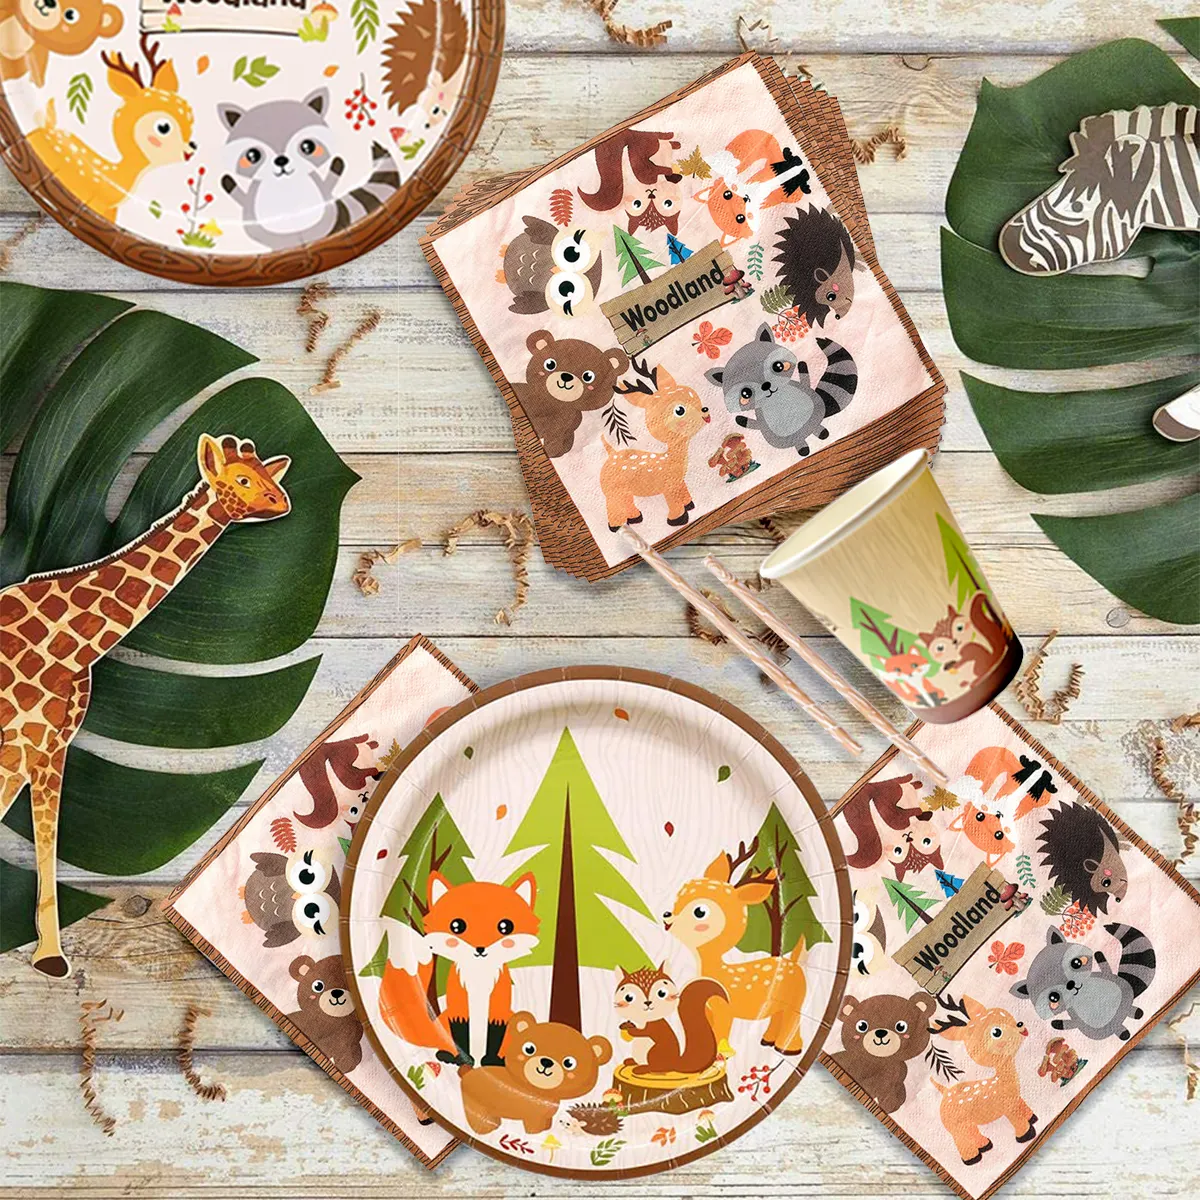 Nicro Jungle Animal Theme Woodland Party Supplies Banner Balloon Cake Topper Tableware Set Kids Birthday Party Decoration